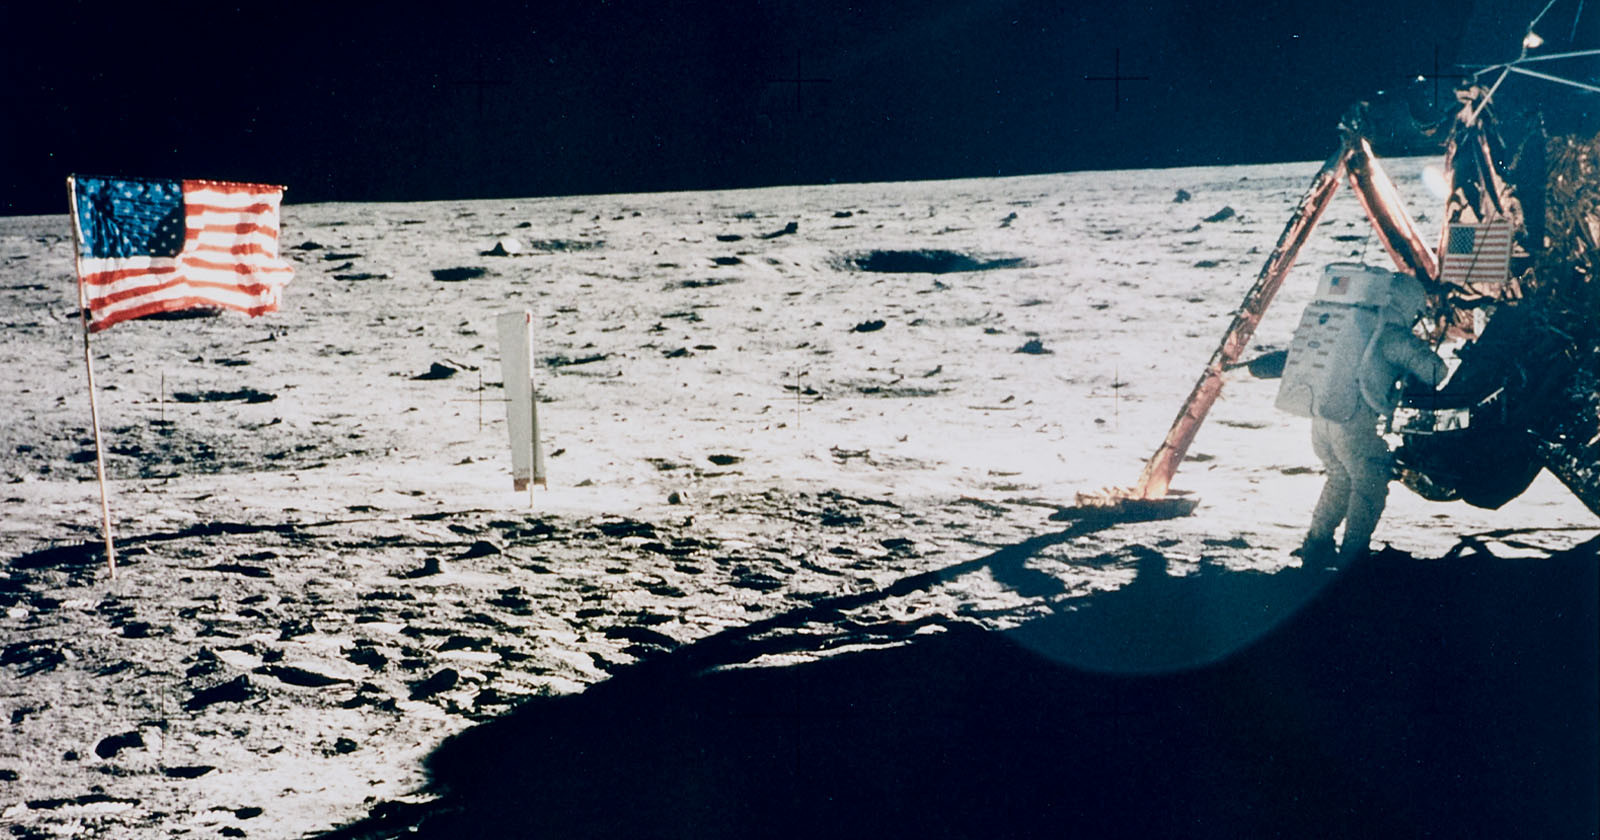 The Only Photo of Neil Armstrong on the Moon Estimated to Sell for $30,000